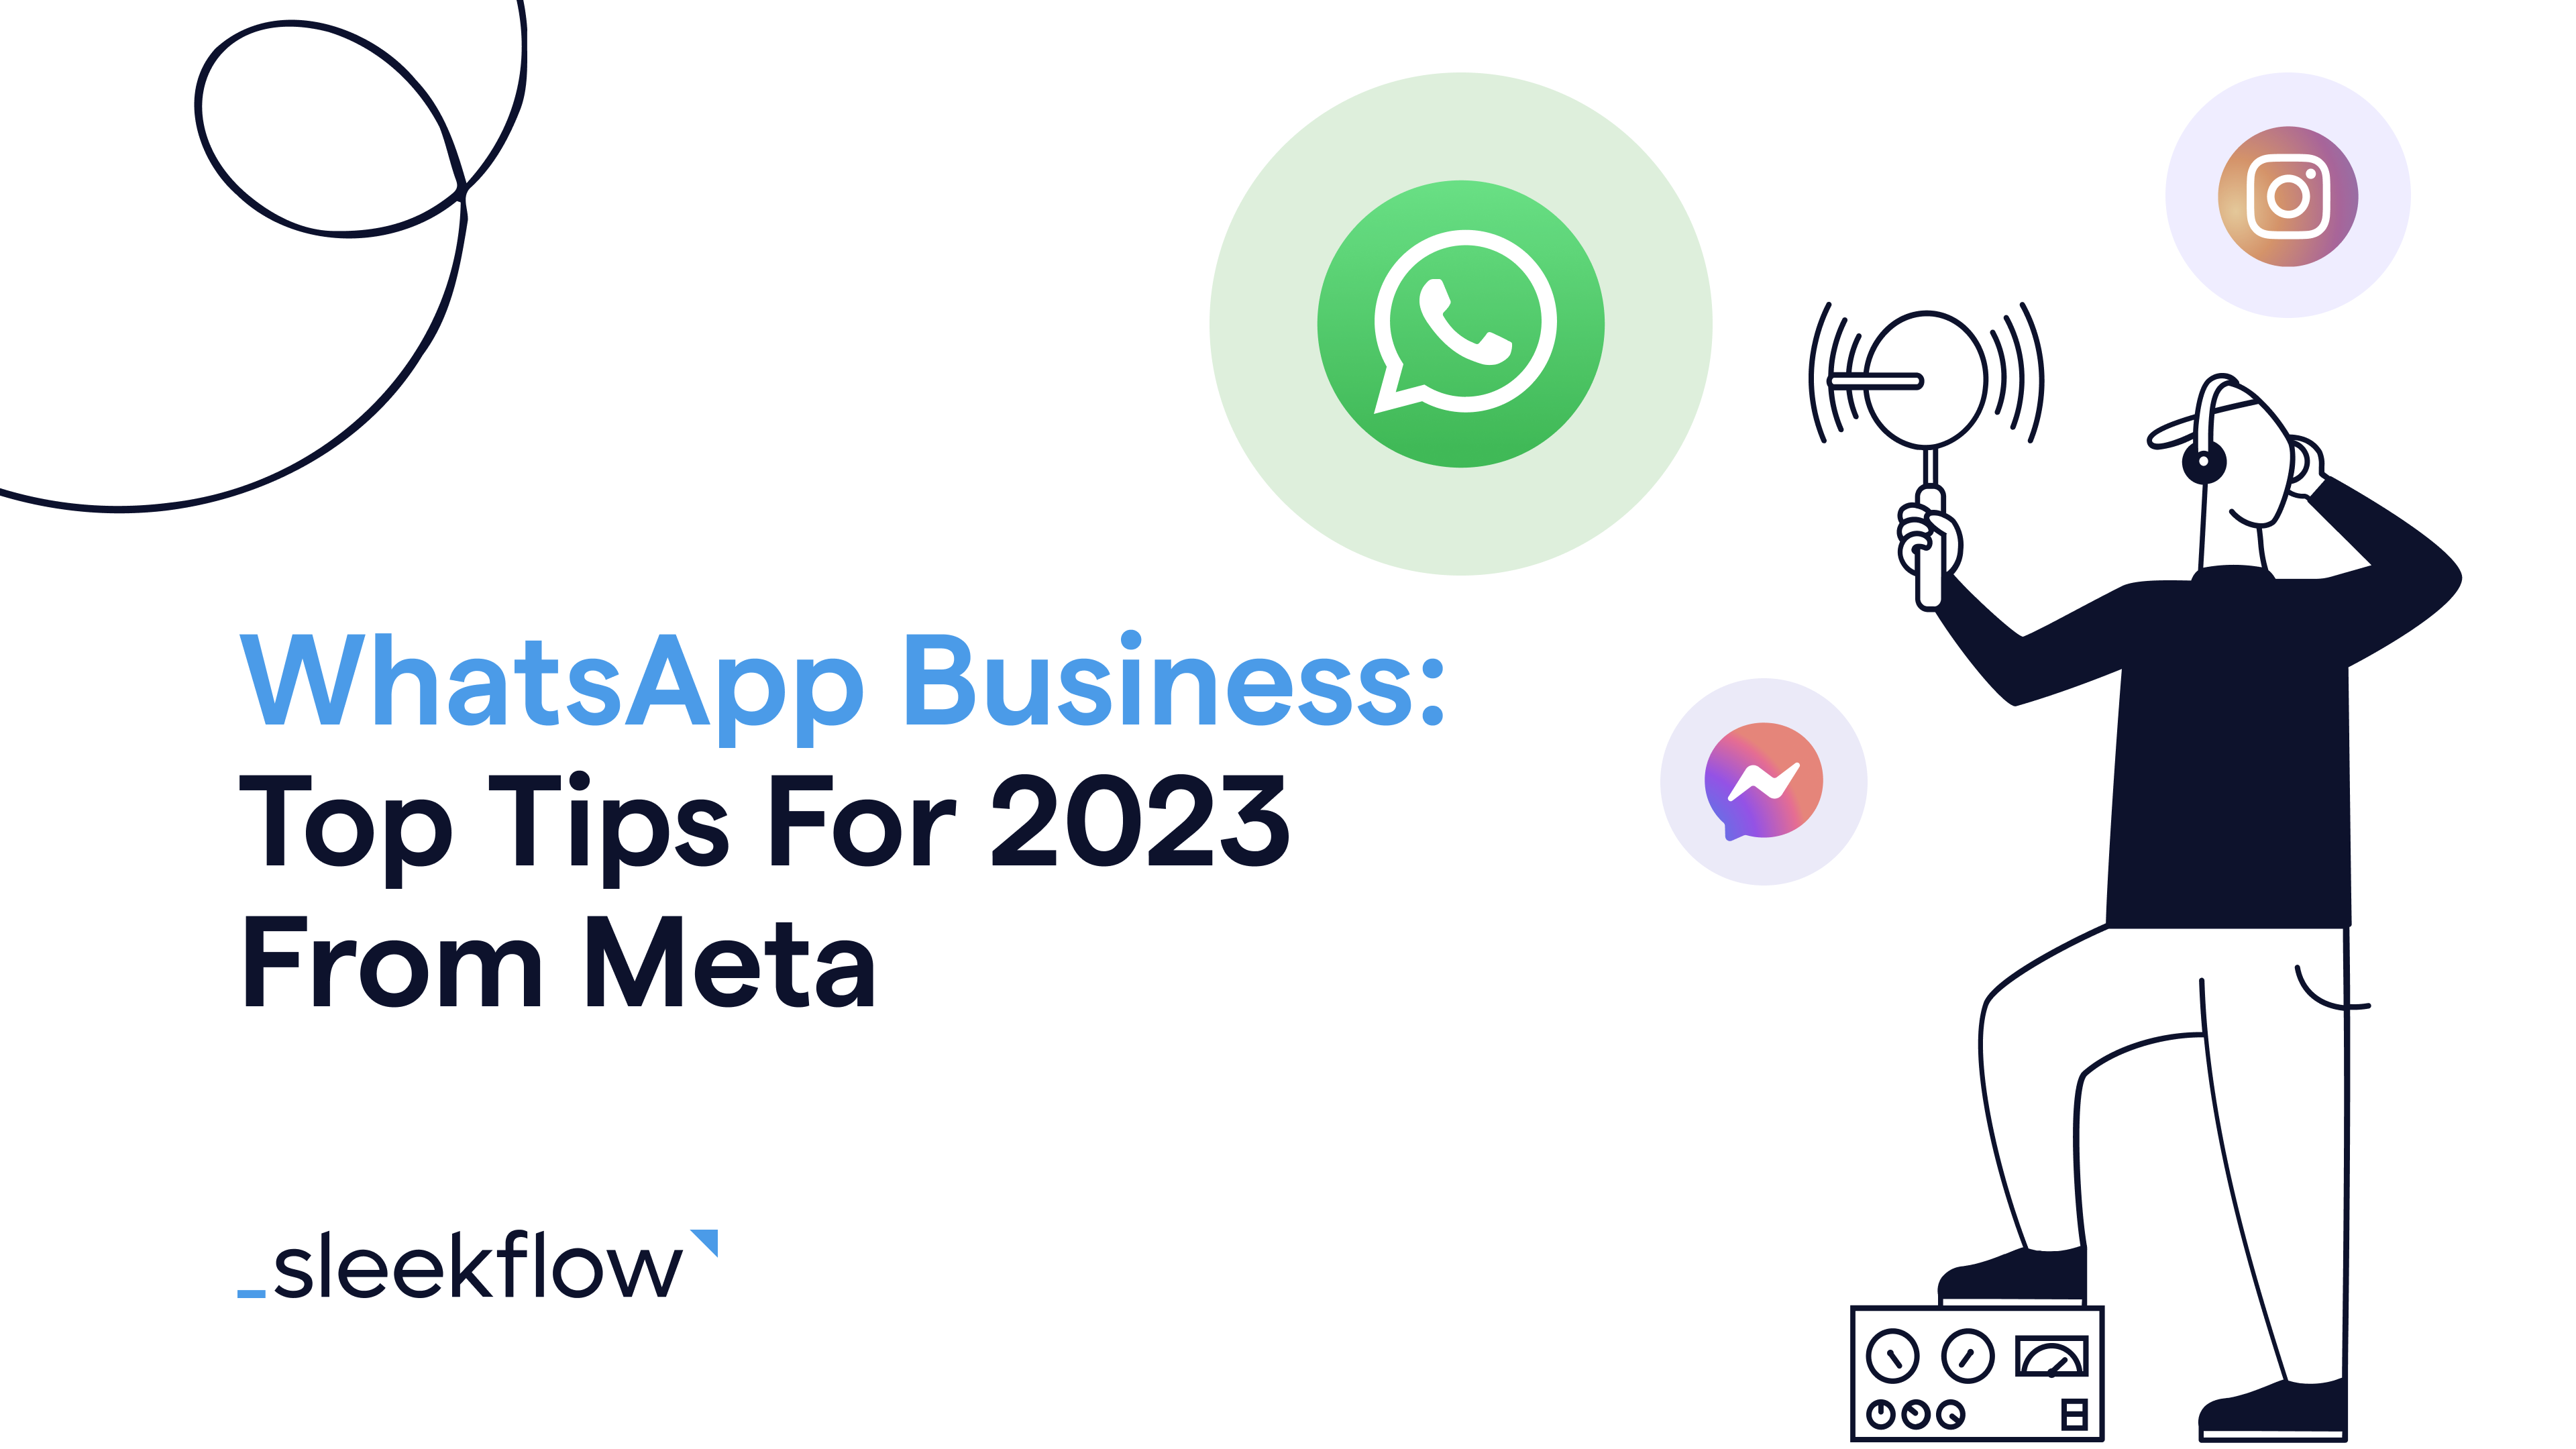 WhatsApp Business Account: Top tips from Meta 2023